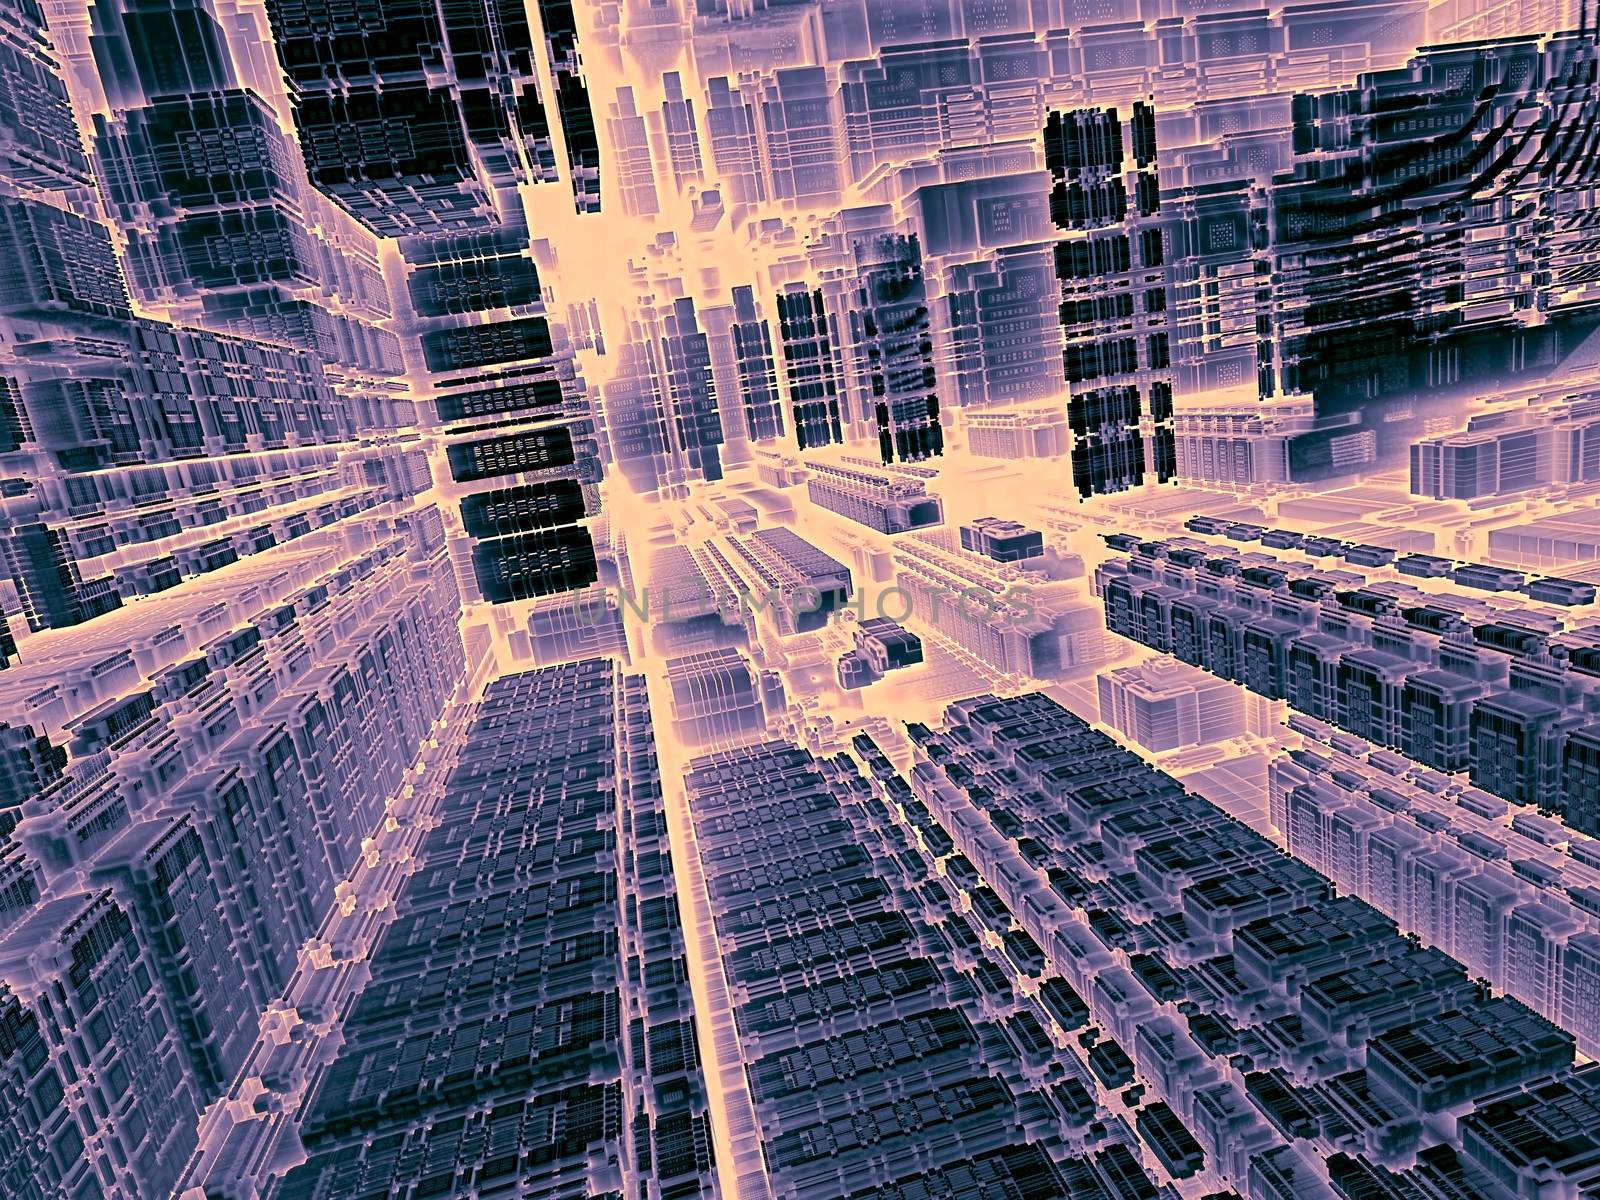 Technology abstract background - computer-generated image. 3d render - fractal illustration in tech style: streets of surreal city or room space station. Trendy concept for high-tech, telecommunications, industry design projects.